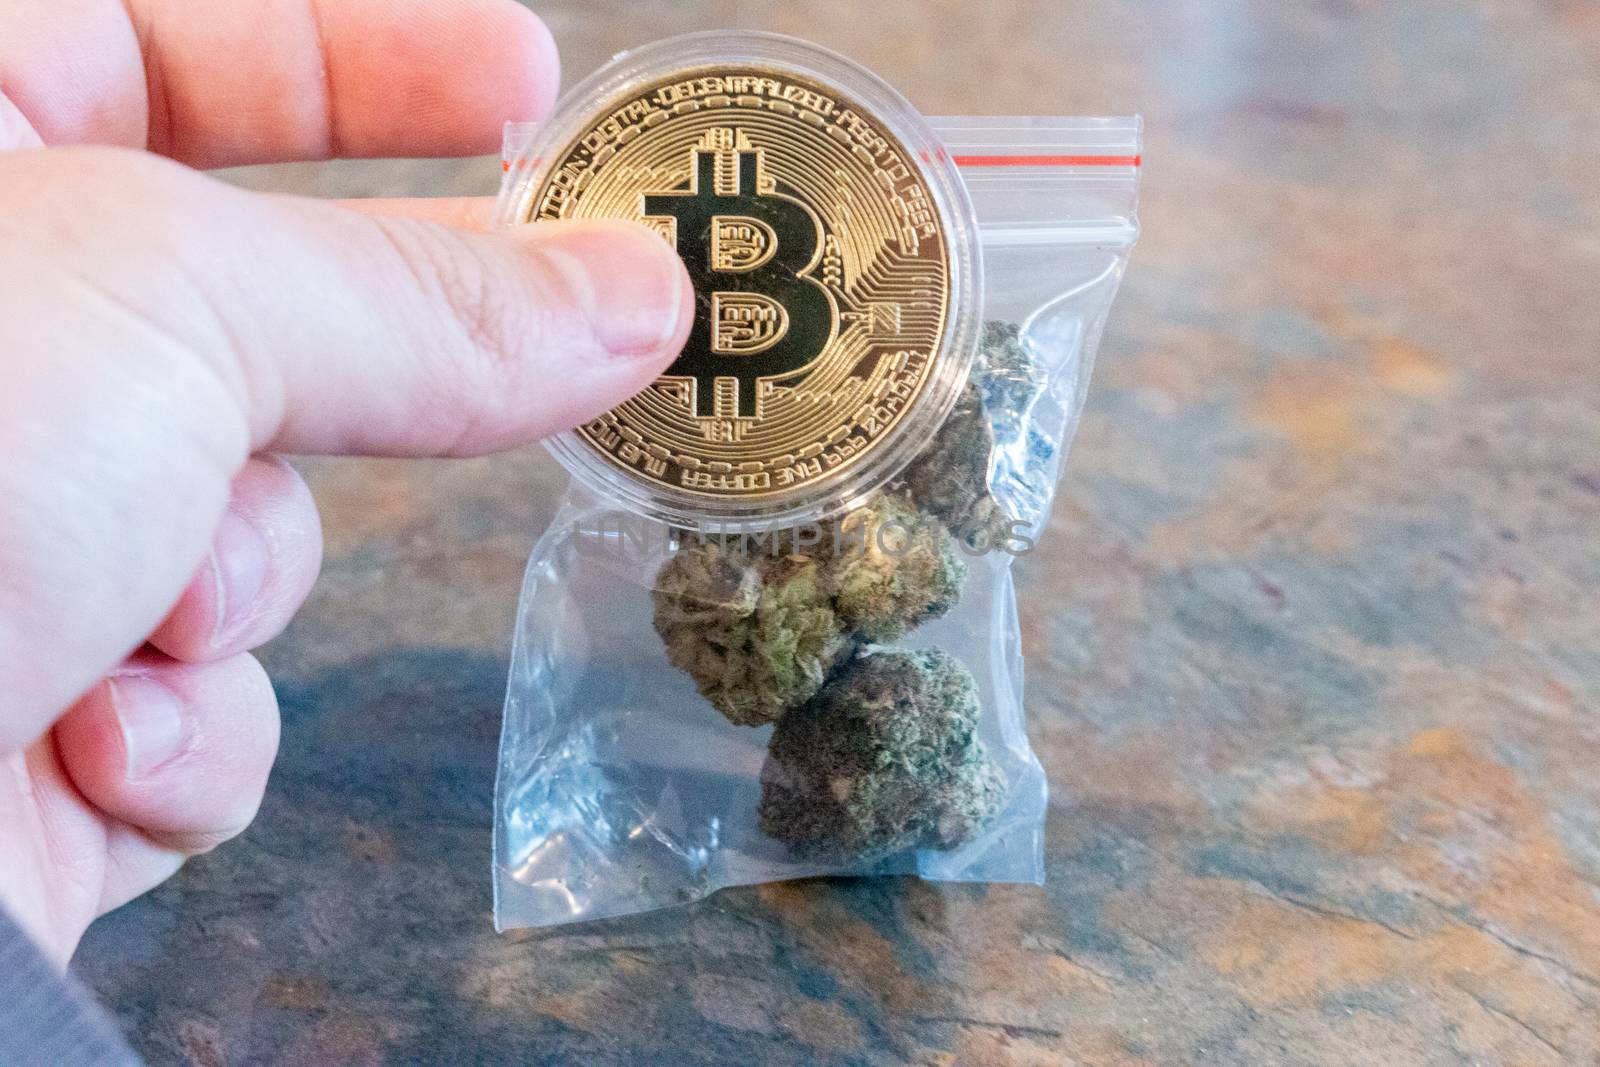 Cannabis Medical Marijuana Buds with Bitcoin Cryptocurrency Coins. by mynewturtle1